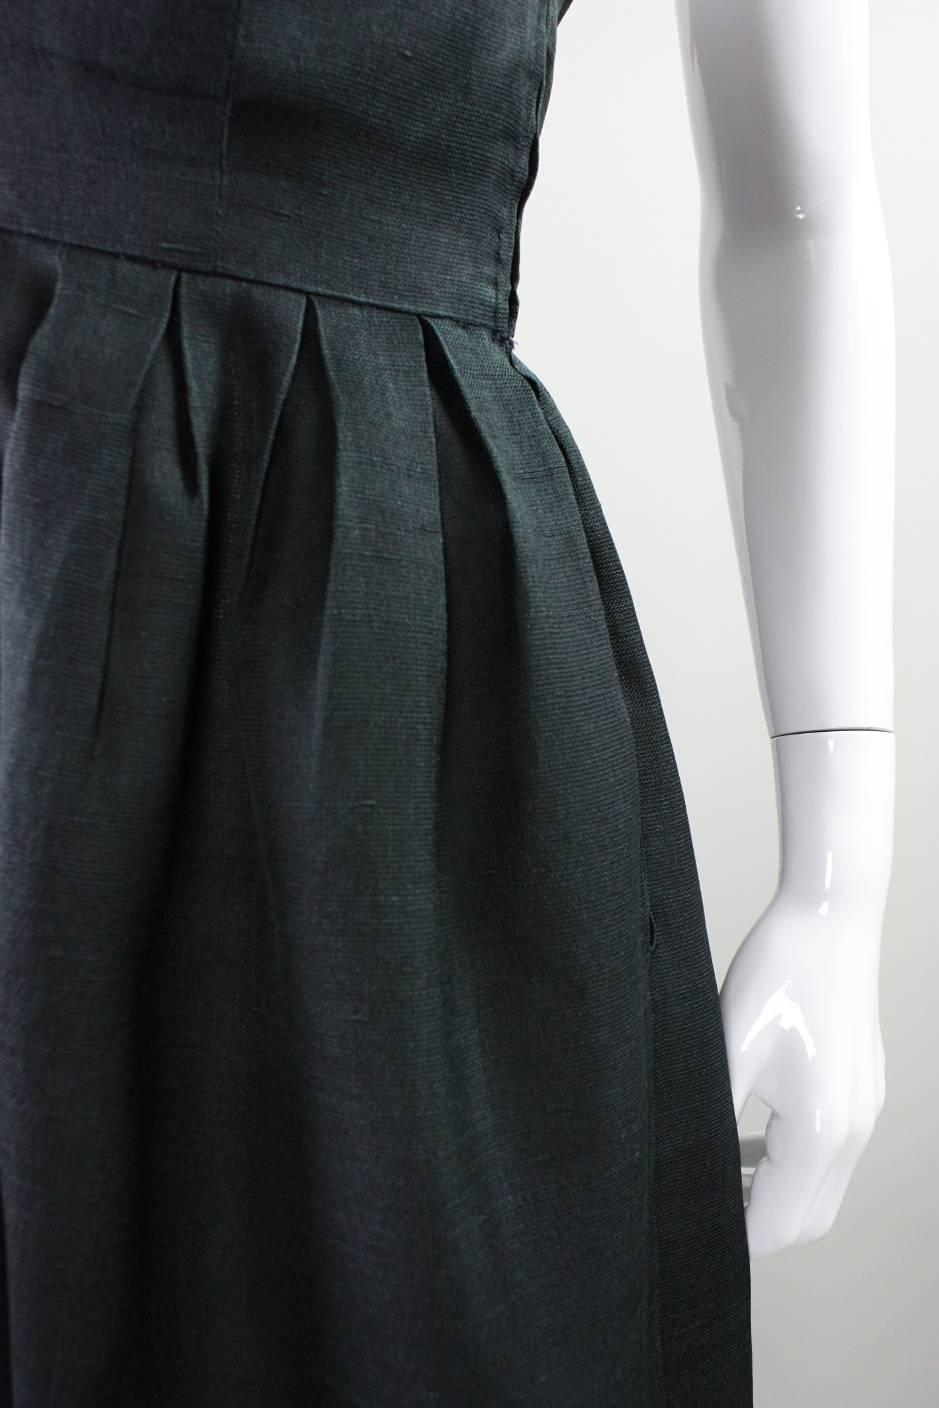 1960's Christian Dior Black Gown with Zigzag Detail For Sale 2